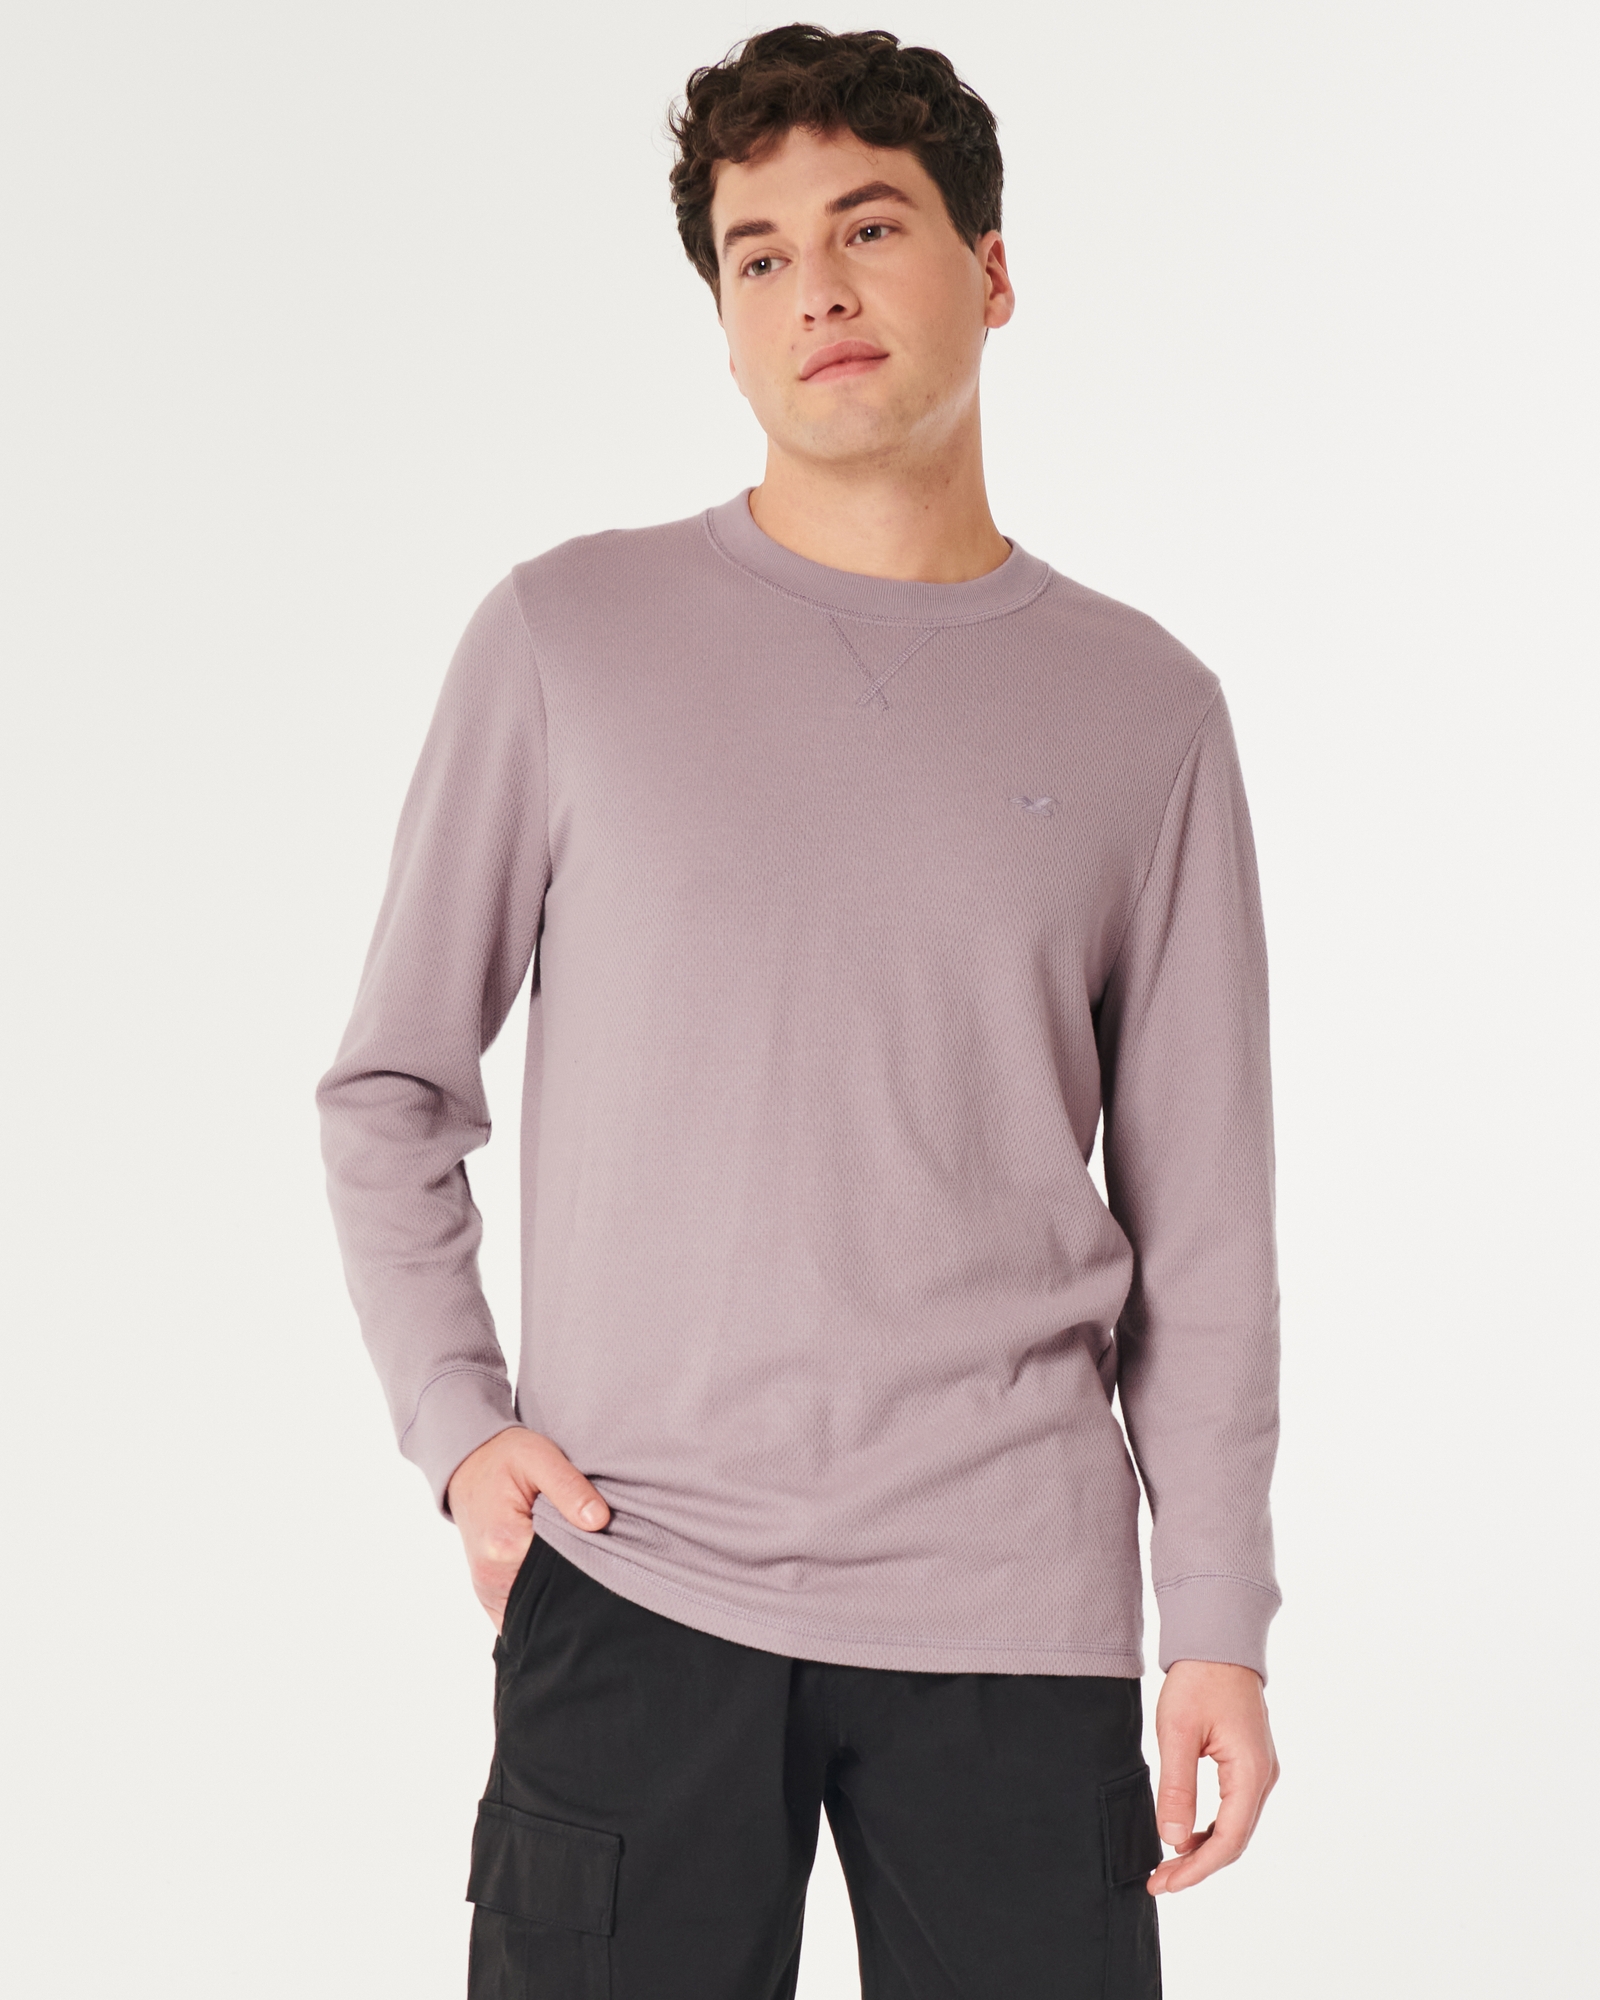 Men's Long-Sleeve Icon Waffle Crew T-Shirt, Men's Clearance